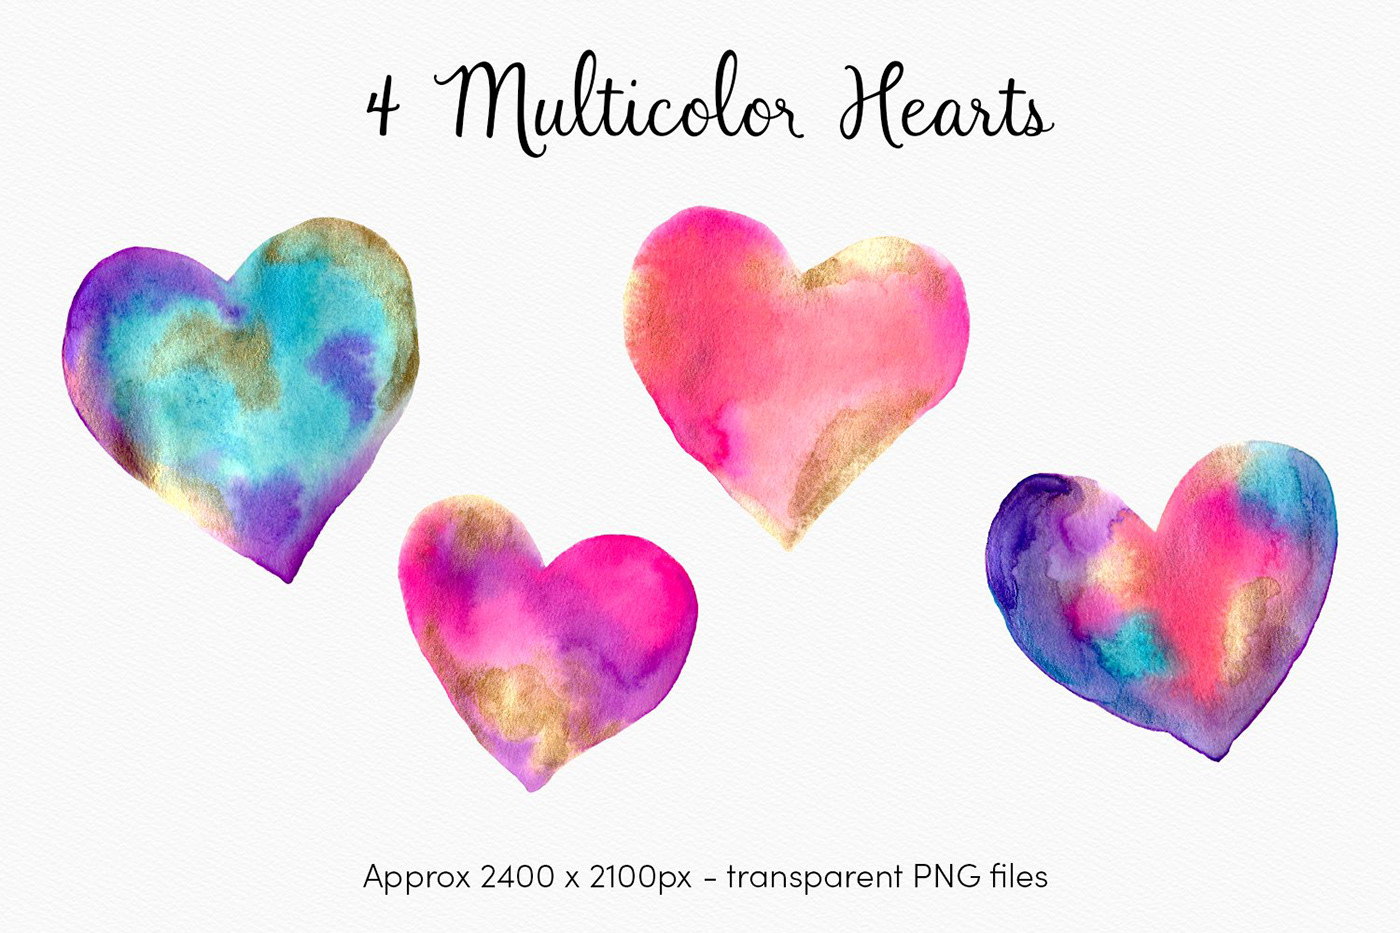 valentines Mother's Day heart clipart save the date wedding invitations Watercolor clipart Love clipart valentines day watercolor hearts wedding clipart